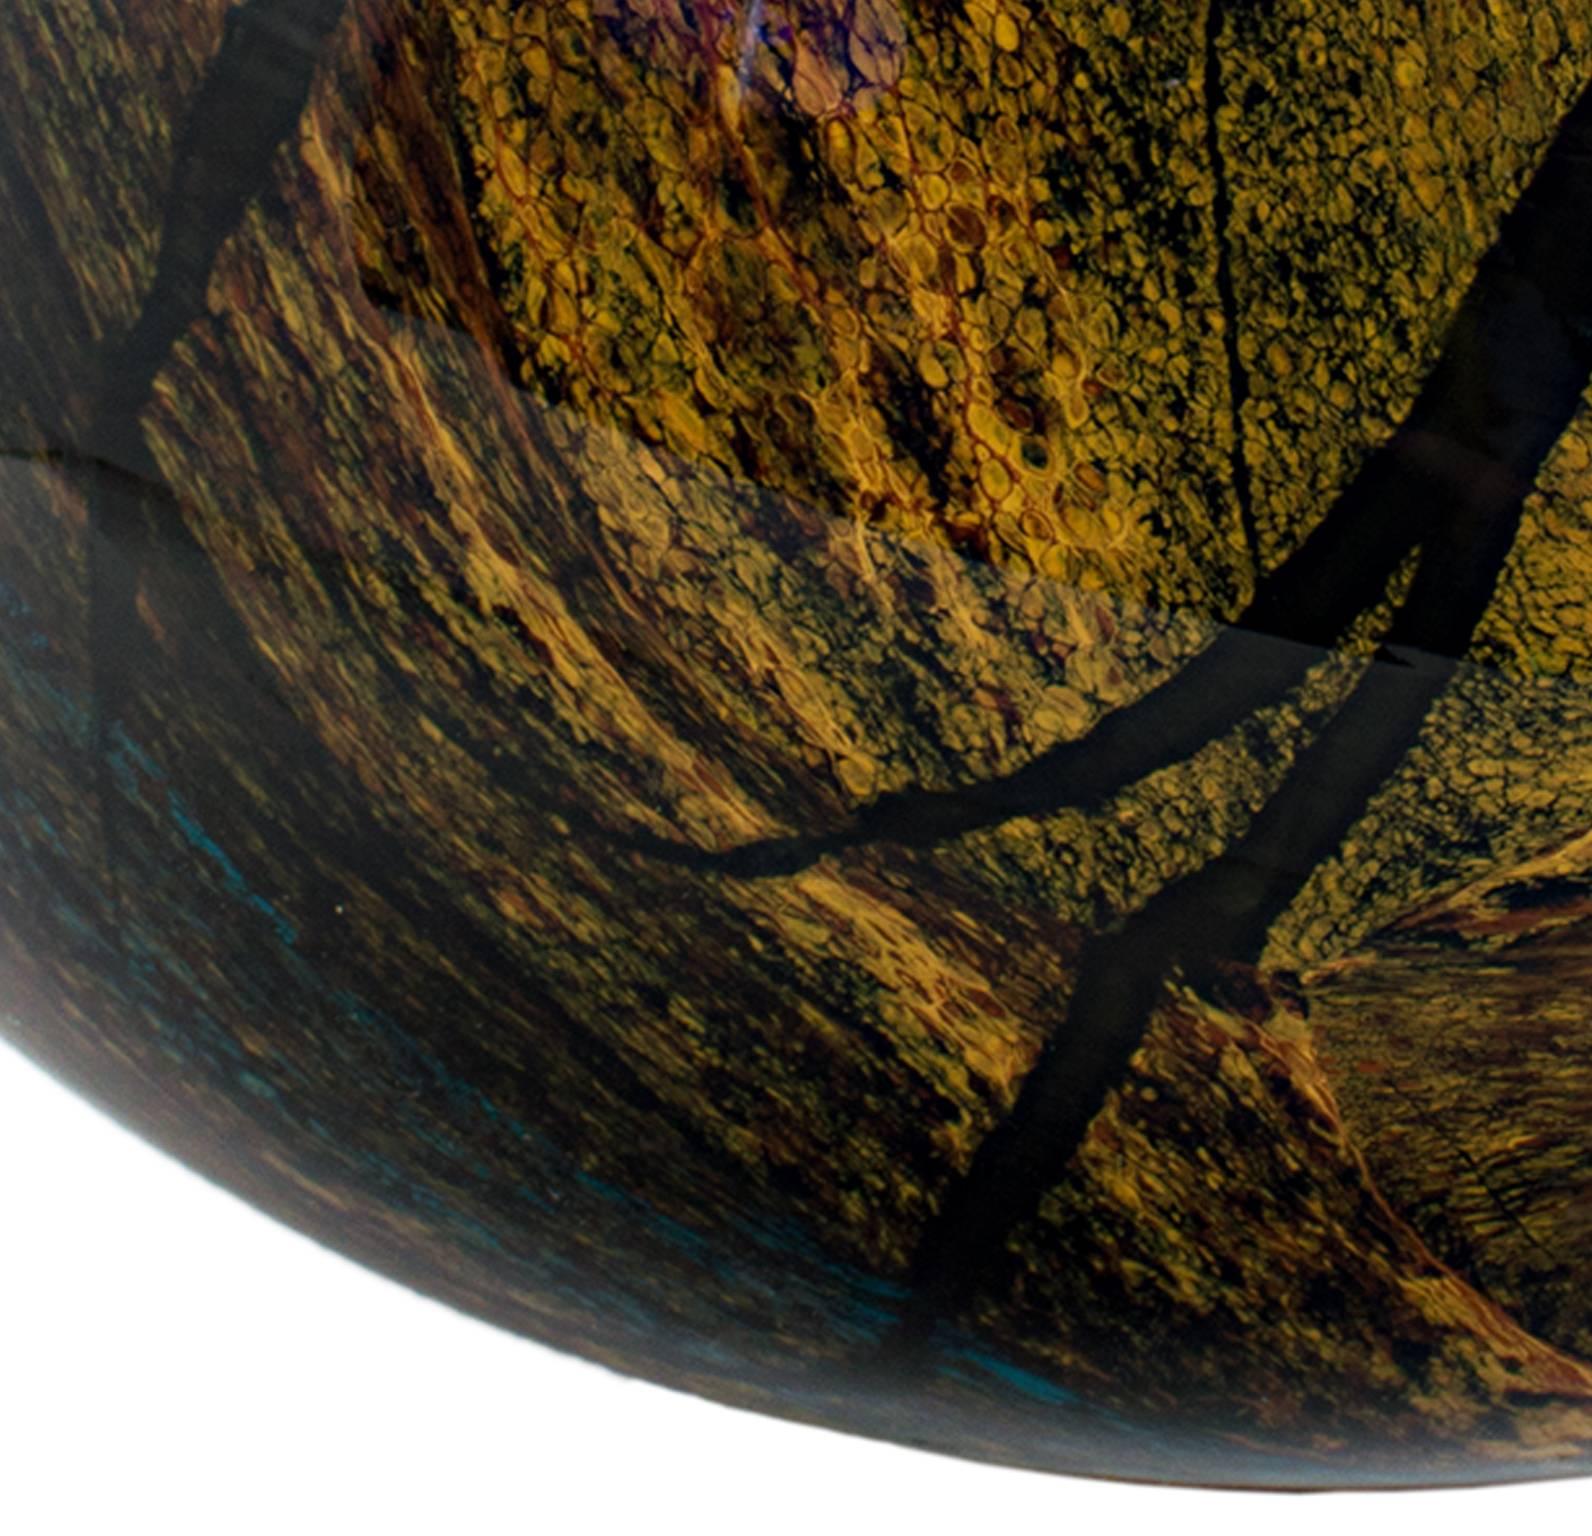 This piece is a hand blown glass egg by Ioan Nemtoi. The artist signed the glass egg. This piece features a natural color palette like yellow ocher, brown, olive green, and black. 

5 1/4